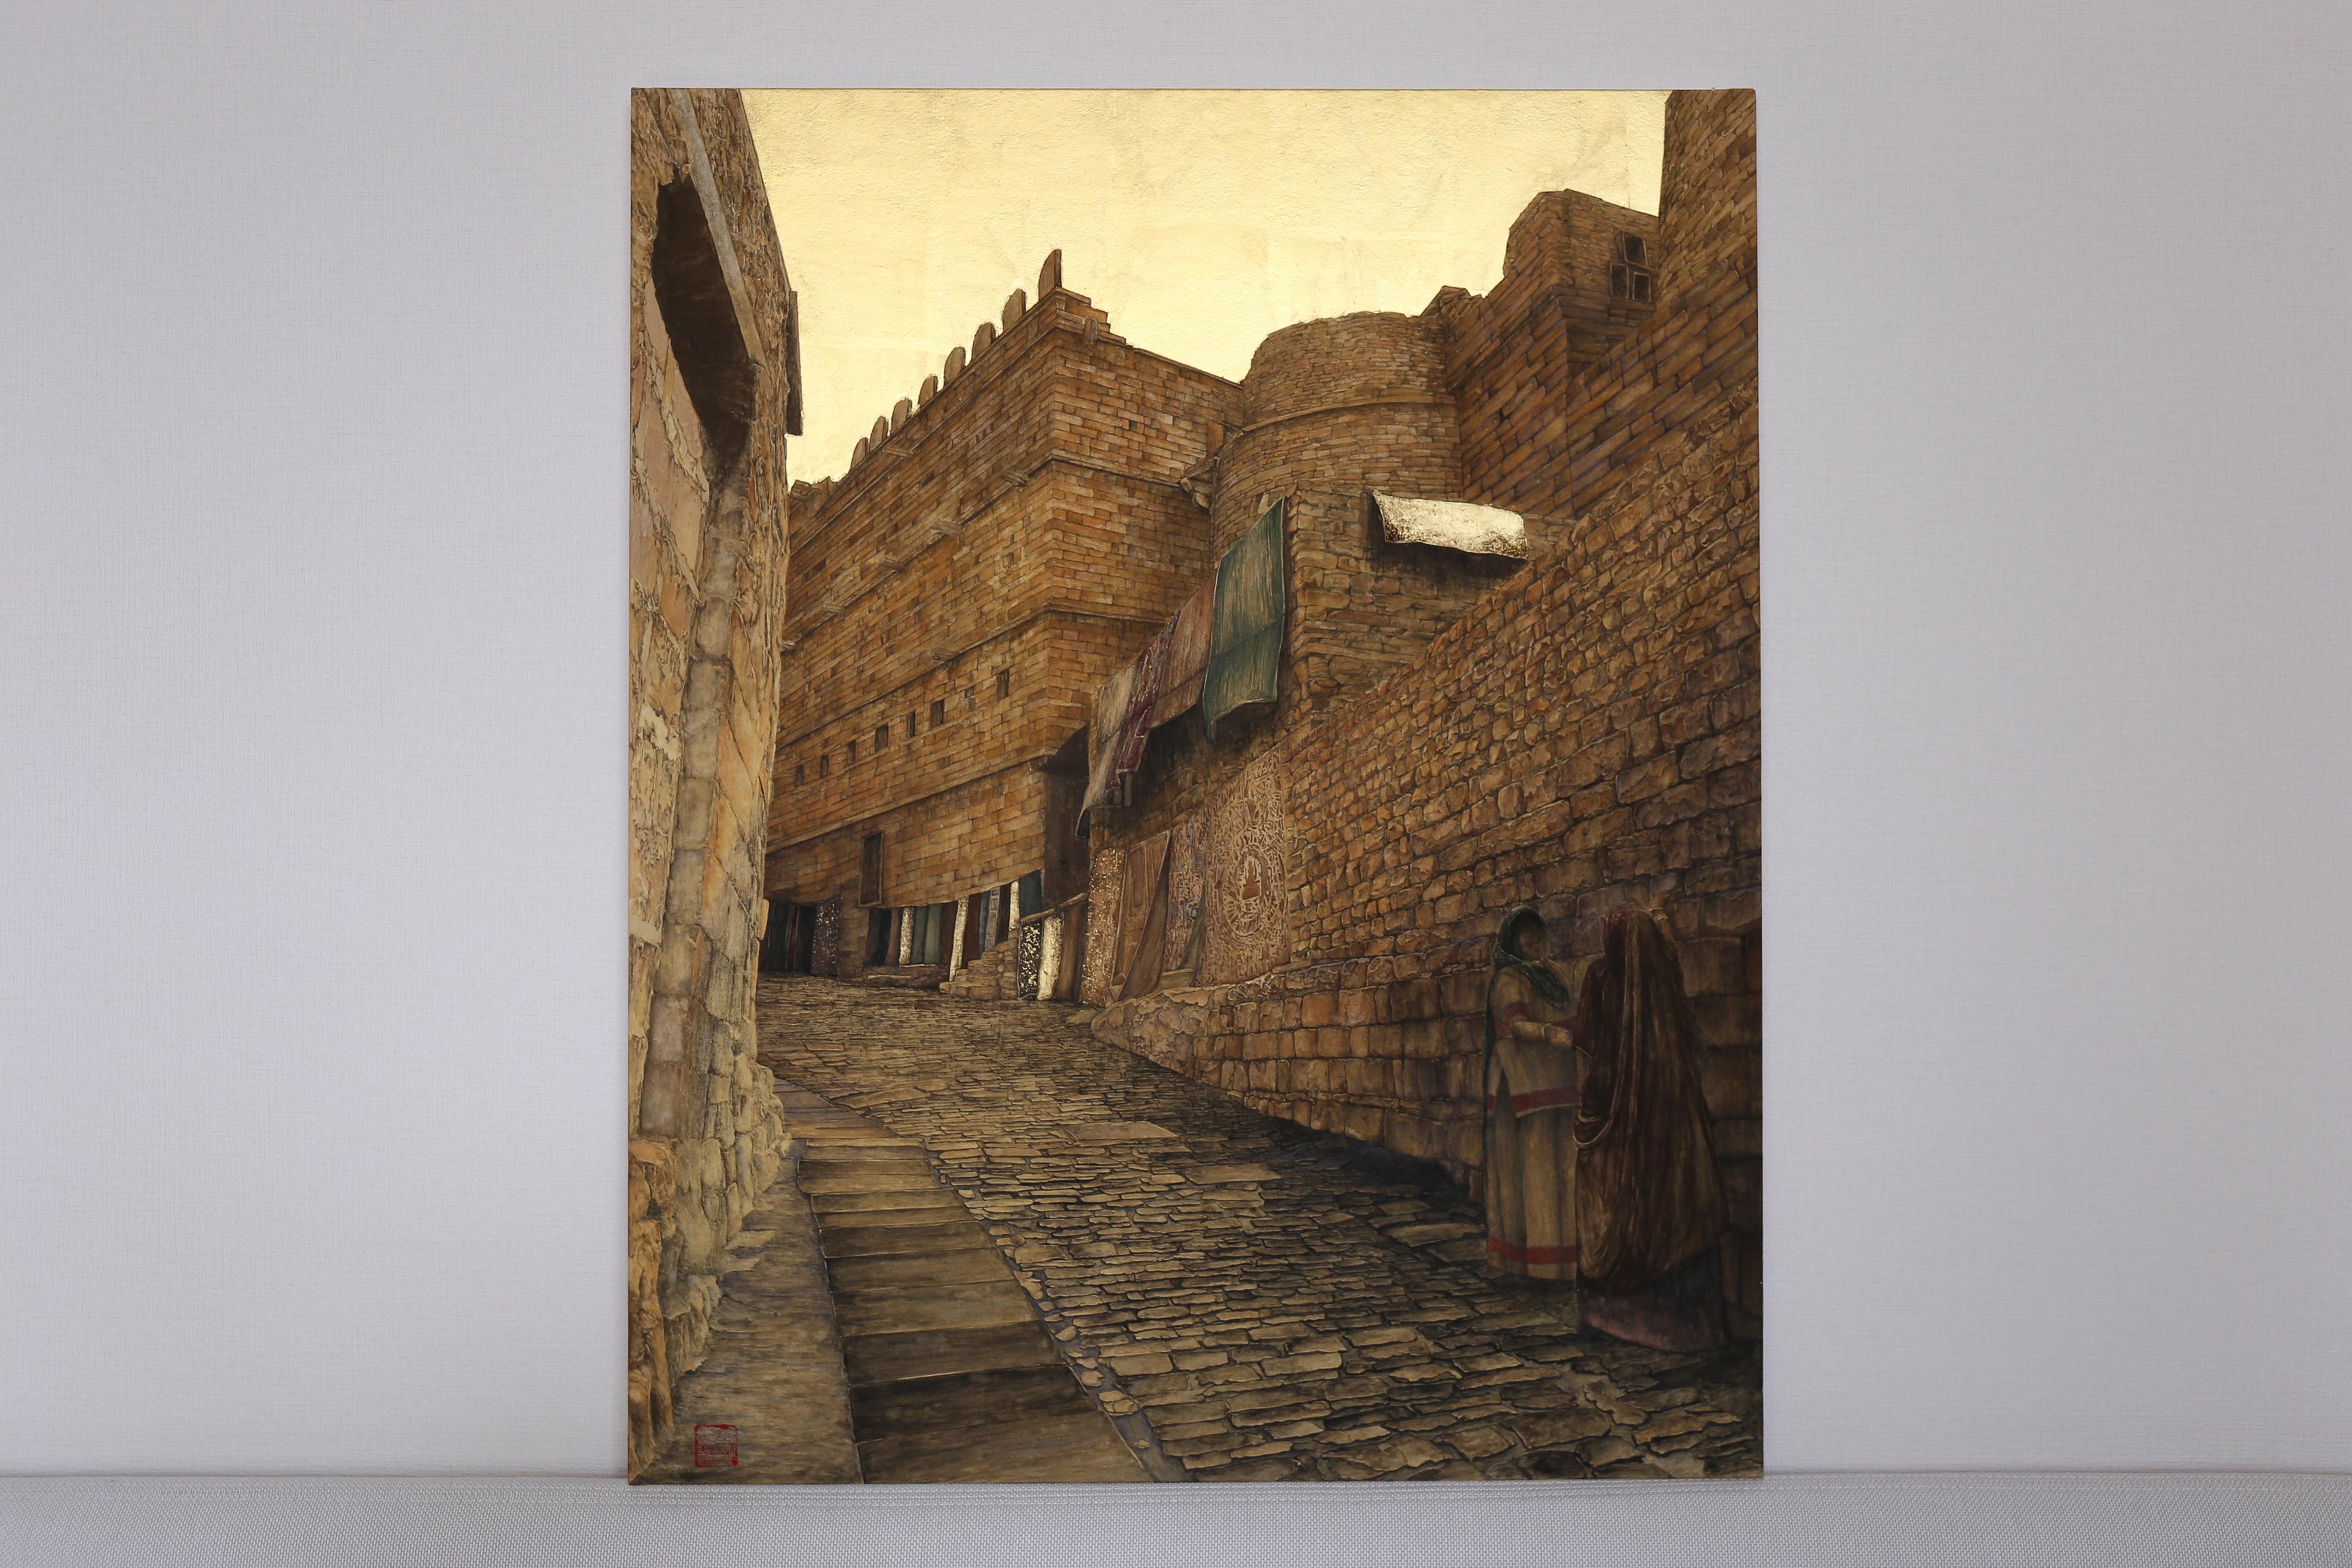 Street of Jaisalmer - Gold Leaf, Mineral and Ores Painting, Streetscape Realism For Sale 10